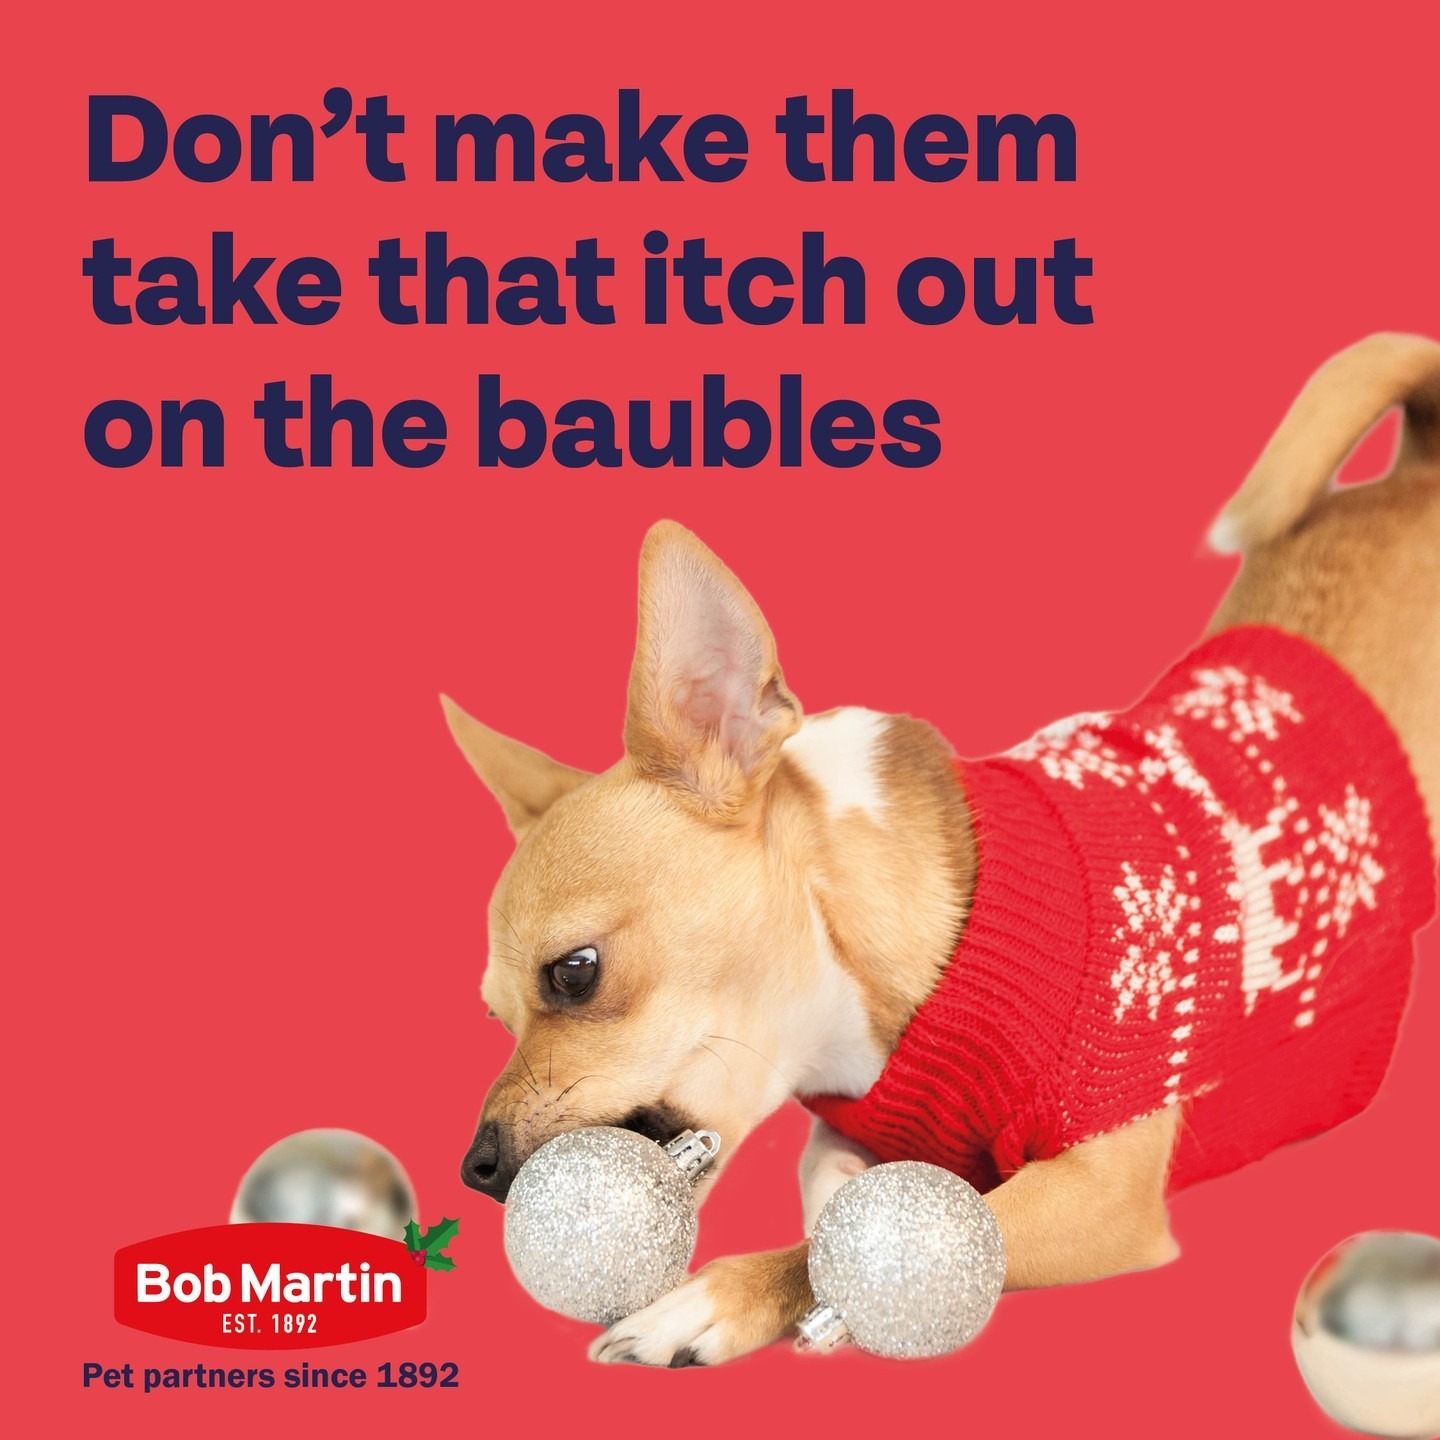 Itchy Christmas jumper got you feeling like you have fleas? Imagine how your pet feels. Keep them protected this ‘fleason’ with our range of vet-strength products 🐾

Shop via the link in our bio.

#BobMartin #PetHealthcare #Flea #Worm #Dog #Cat #SpotOn #Pets #PetsOfInstagram #PetCare #PetTips #PetHealth #HealthyPets #ActivePets #christmas #christmasjumper